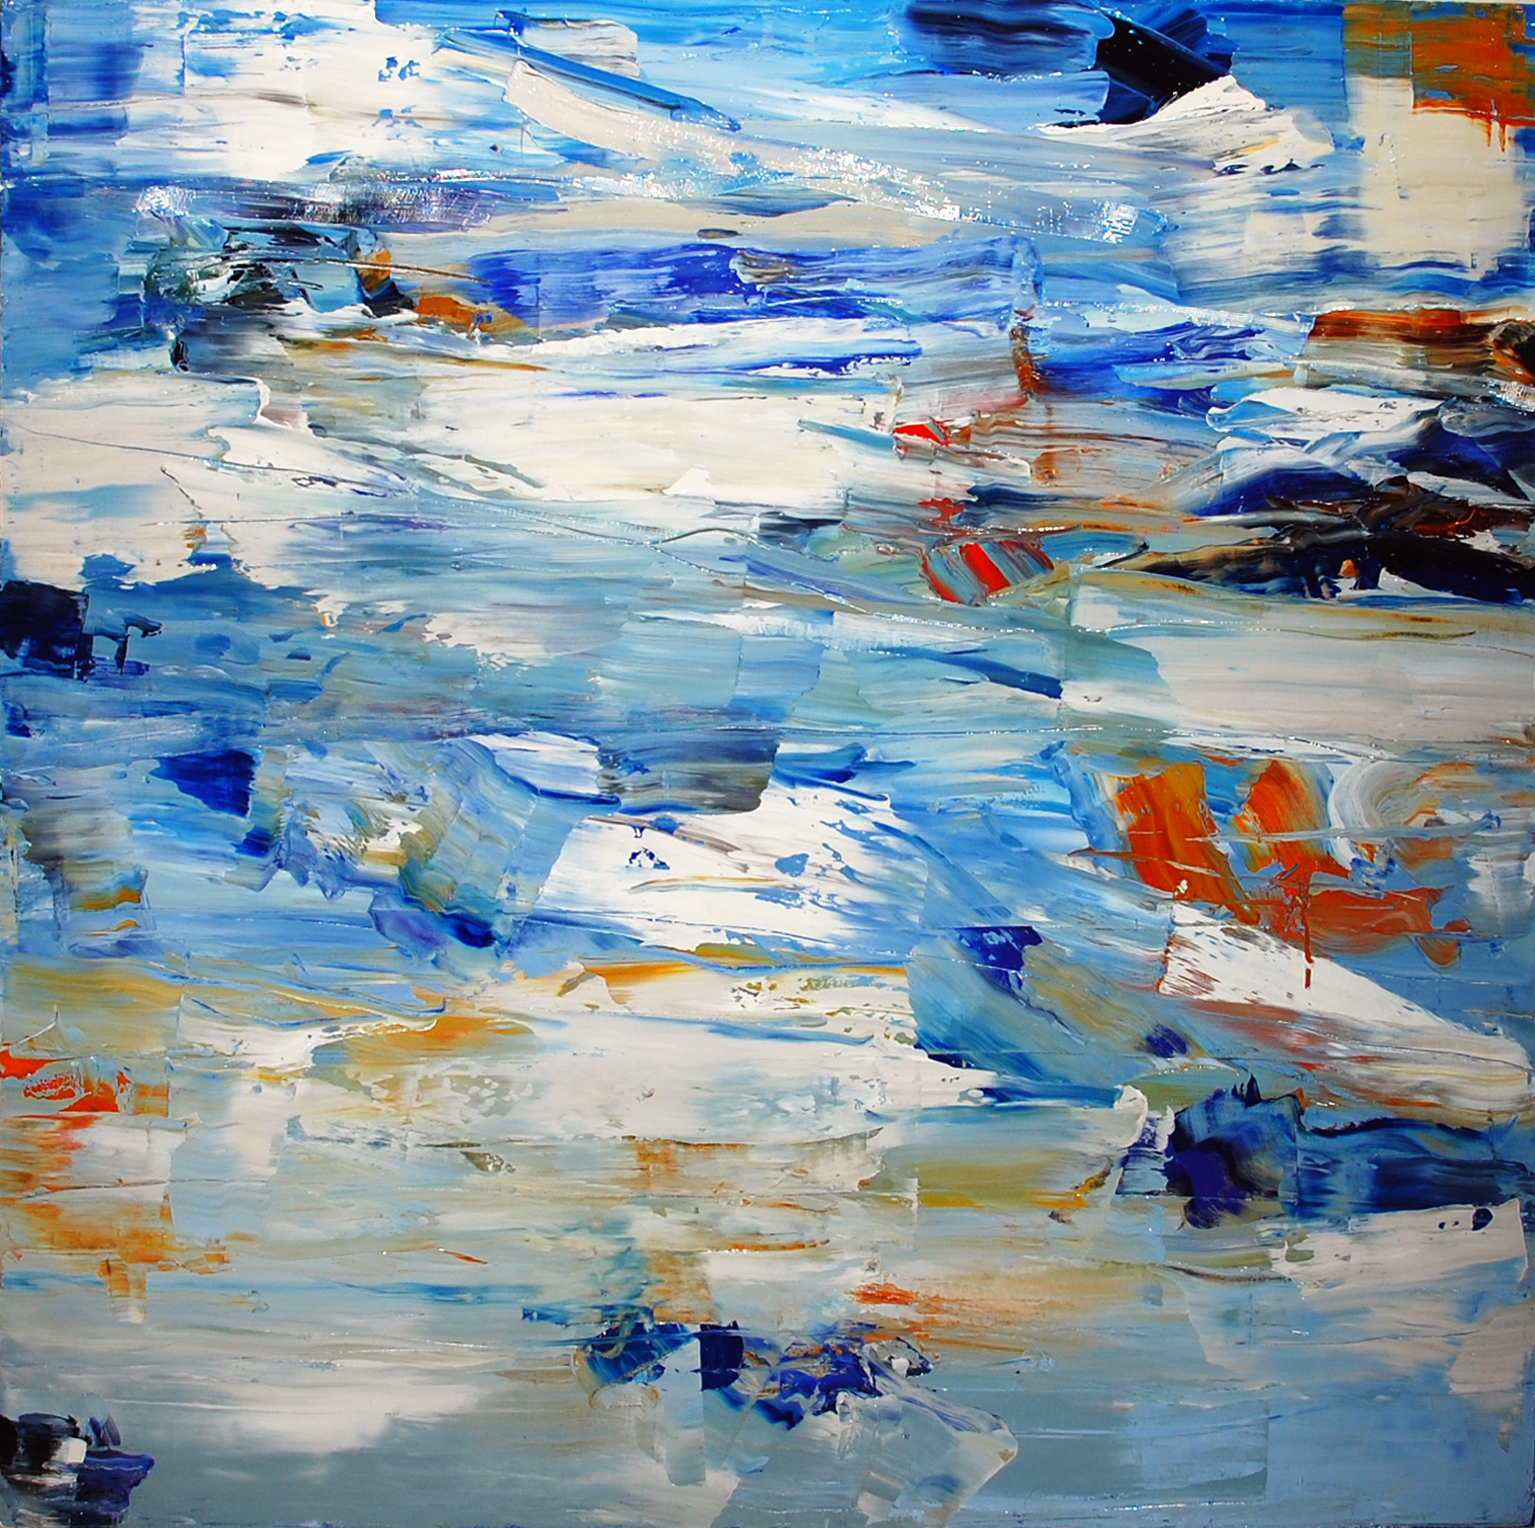 BLUE SLIP, oil on canvas, 48 x 48 inches